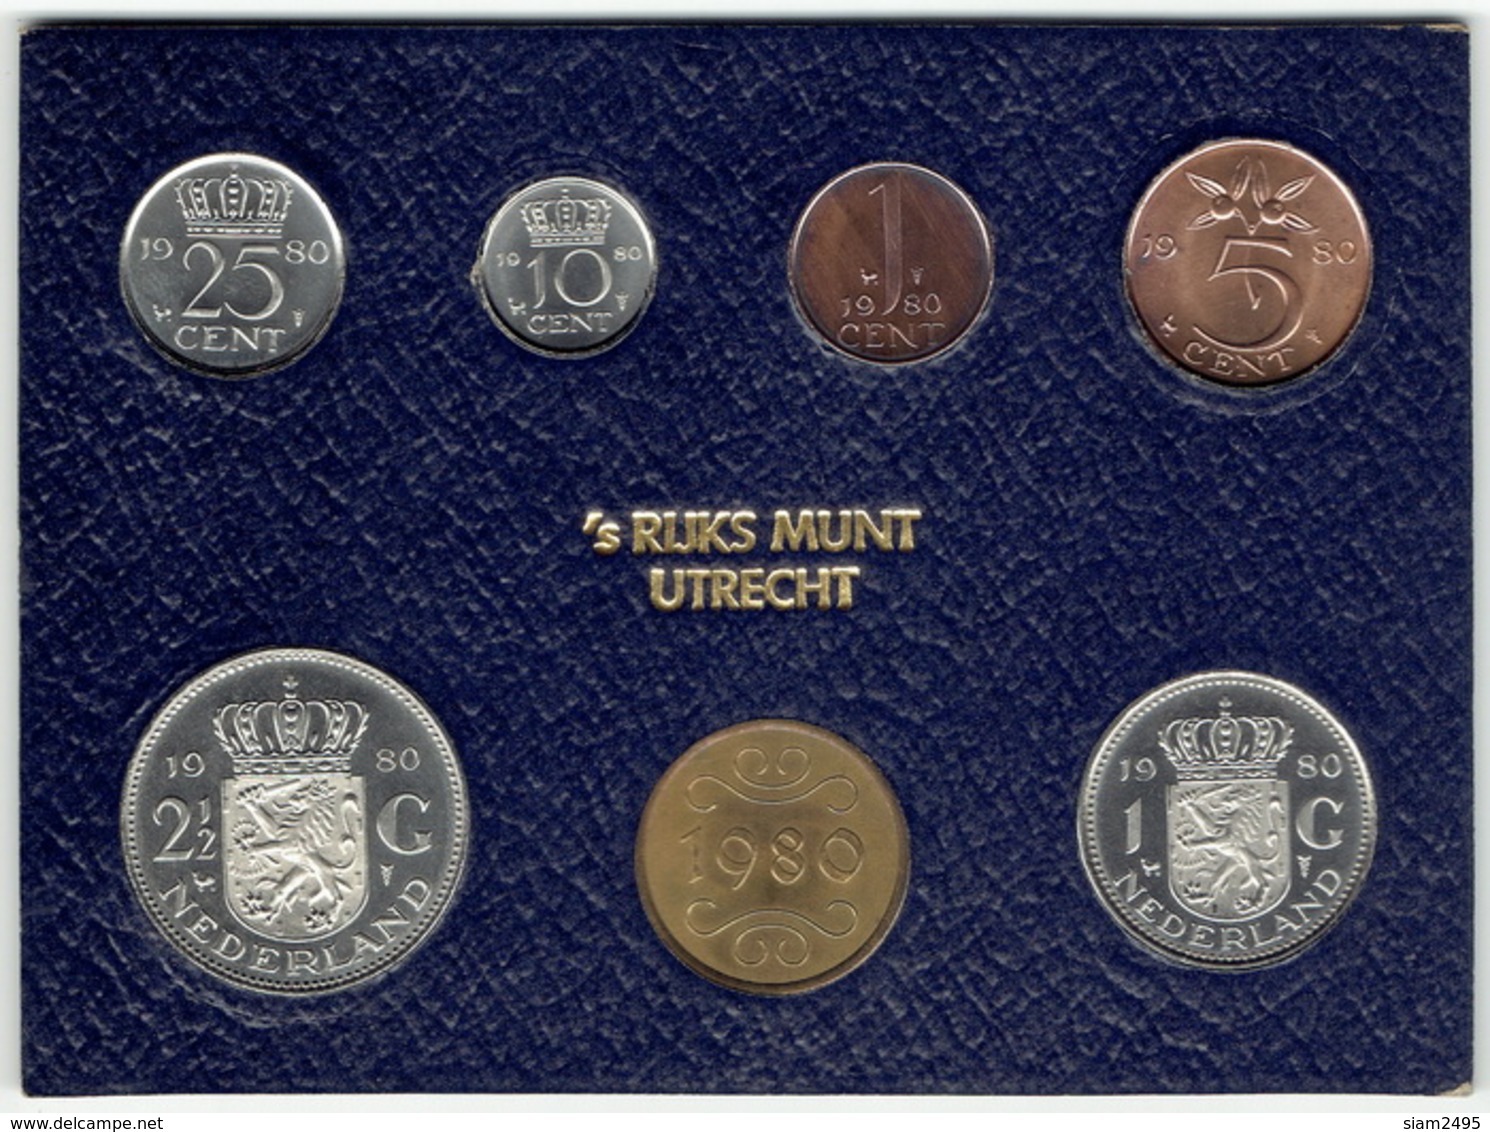 The Netherlands 1980, Mint Year Set With Token. - Nieuwe Sets & Testkits